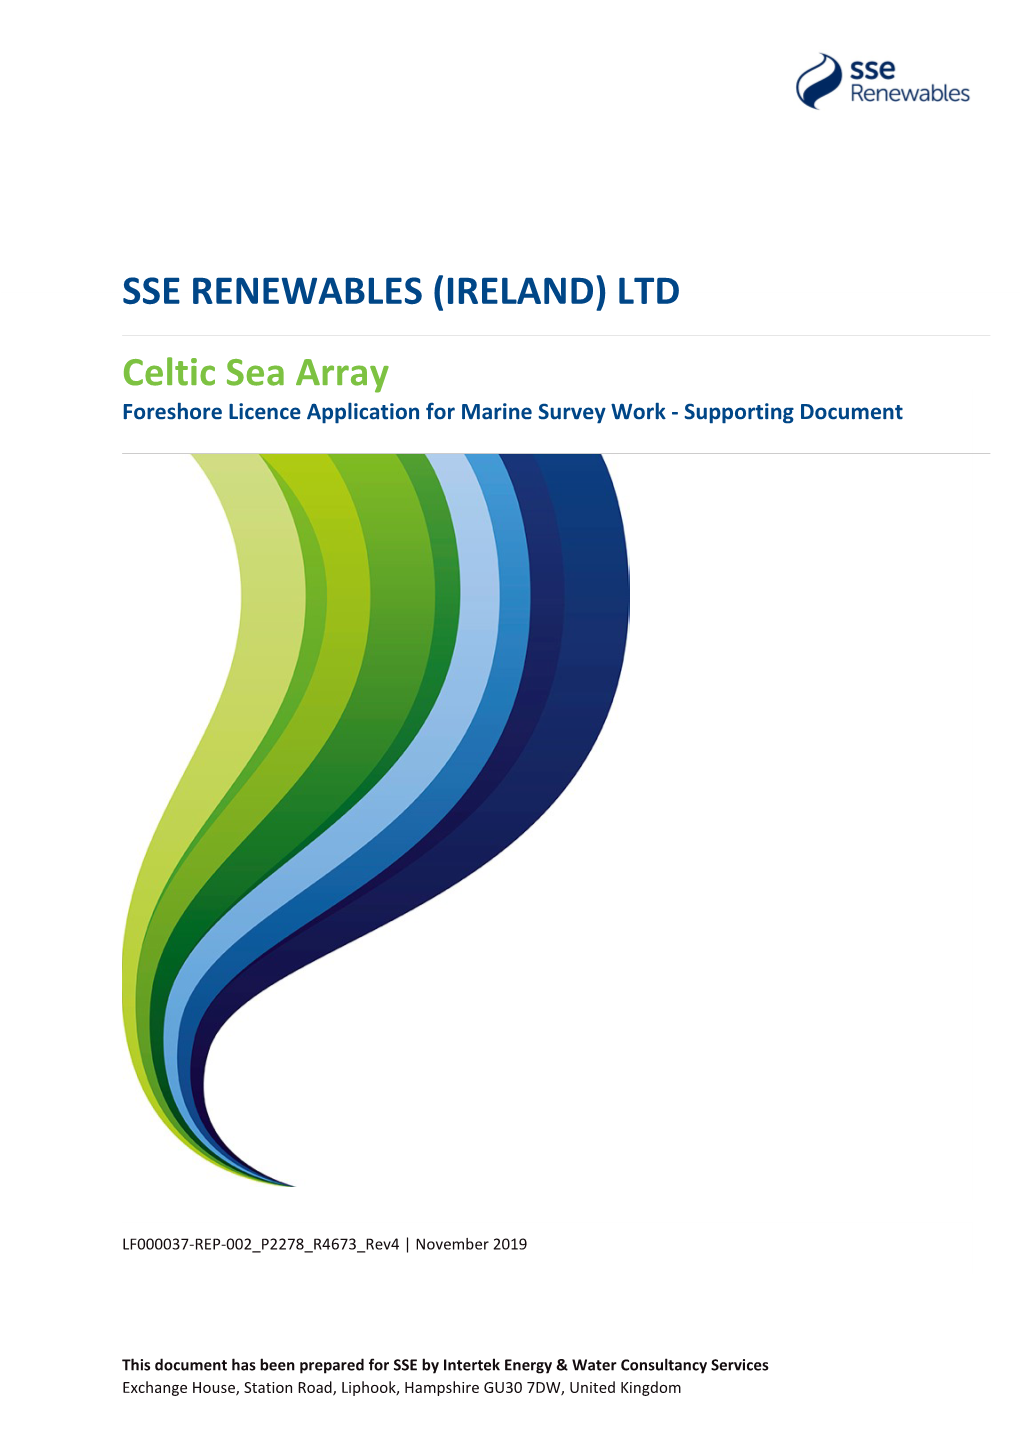 SSE RENEWABLES (IRELAND) LTD Celtic Sea Array Foreshore Licence Application for Marine Survey Work - Supporting Document